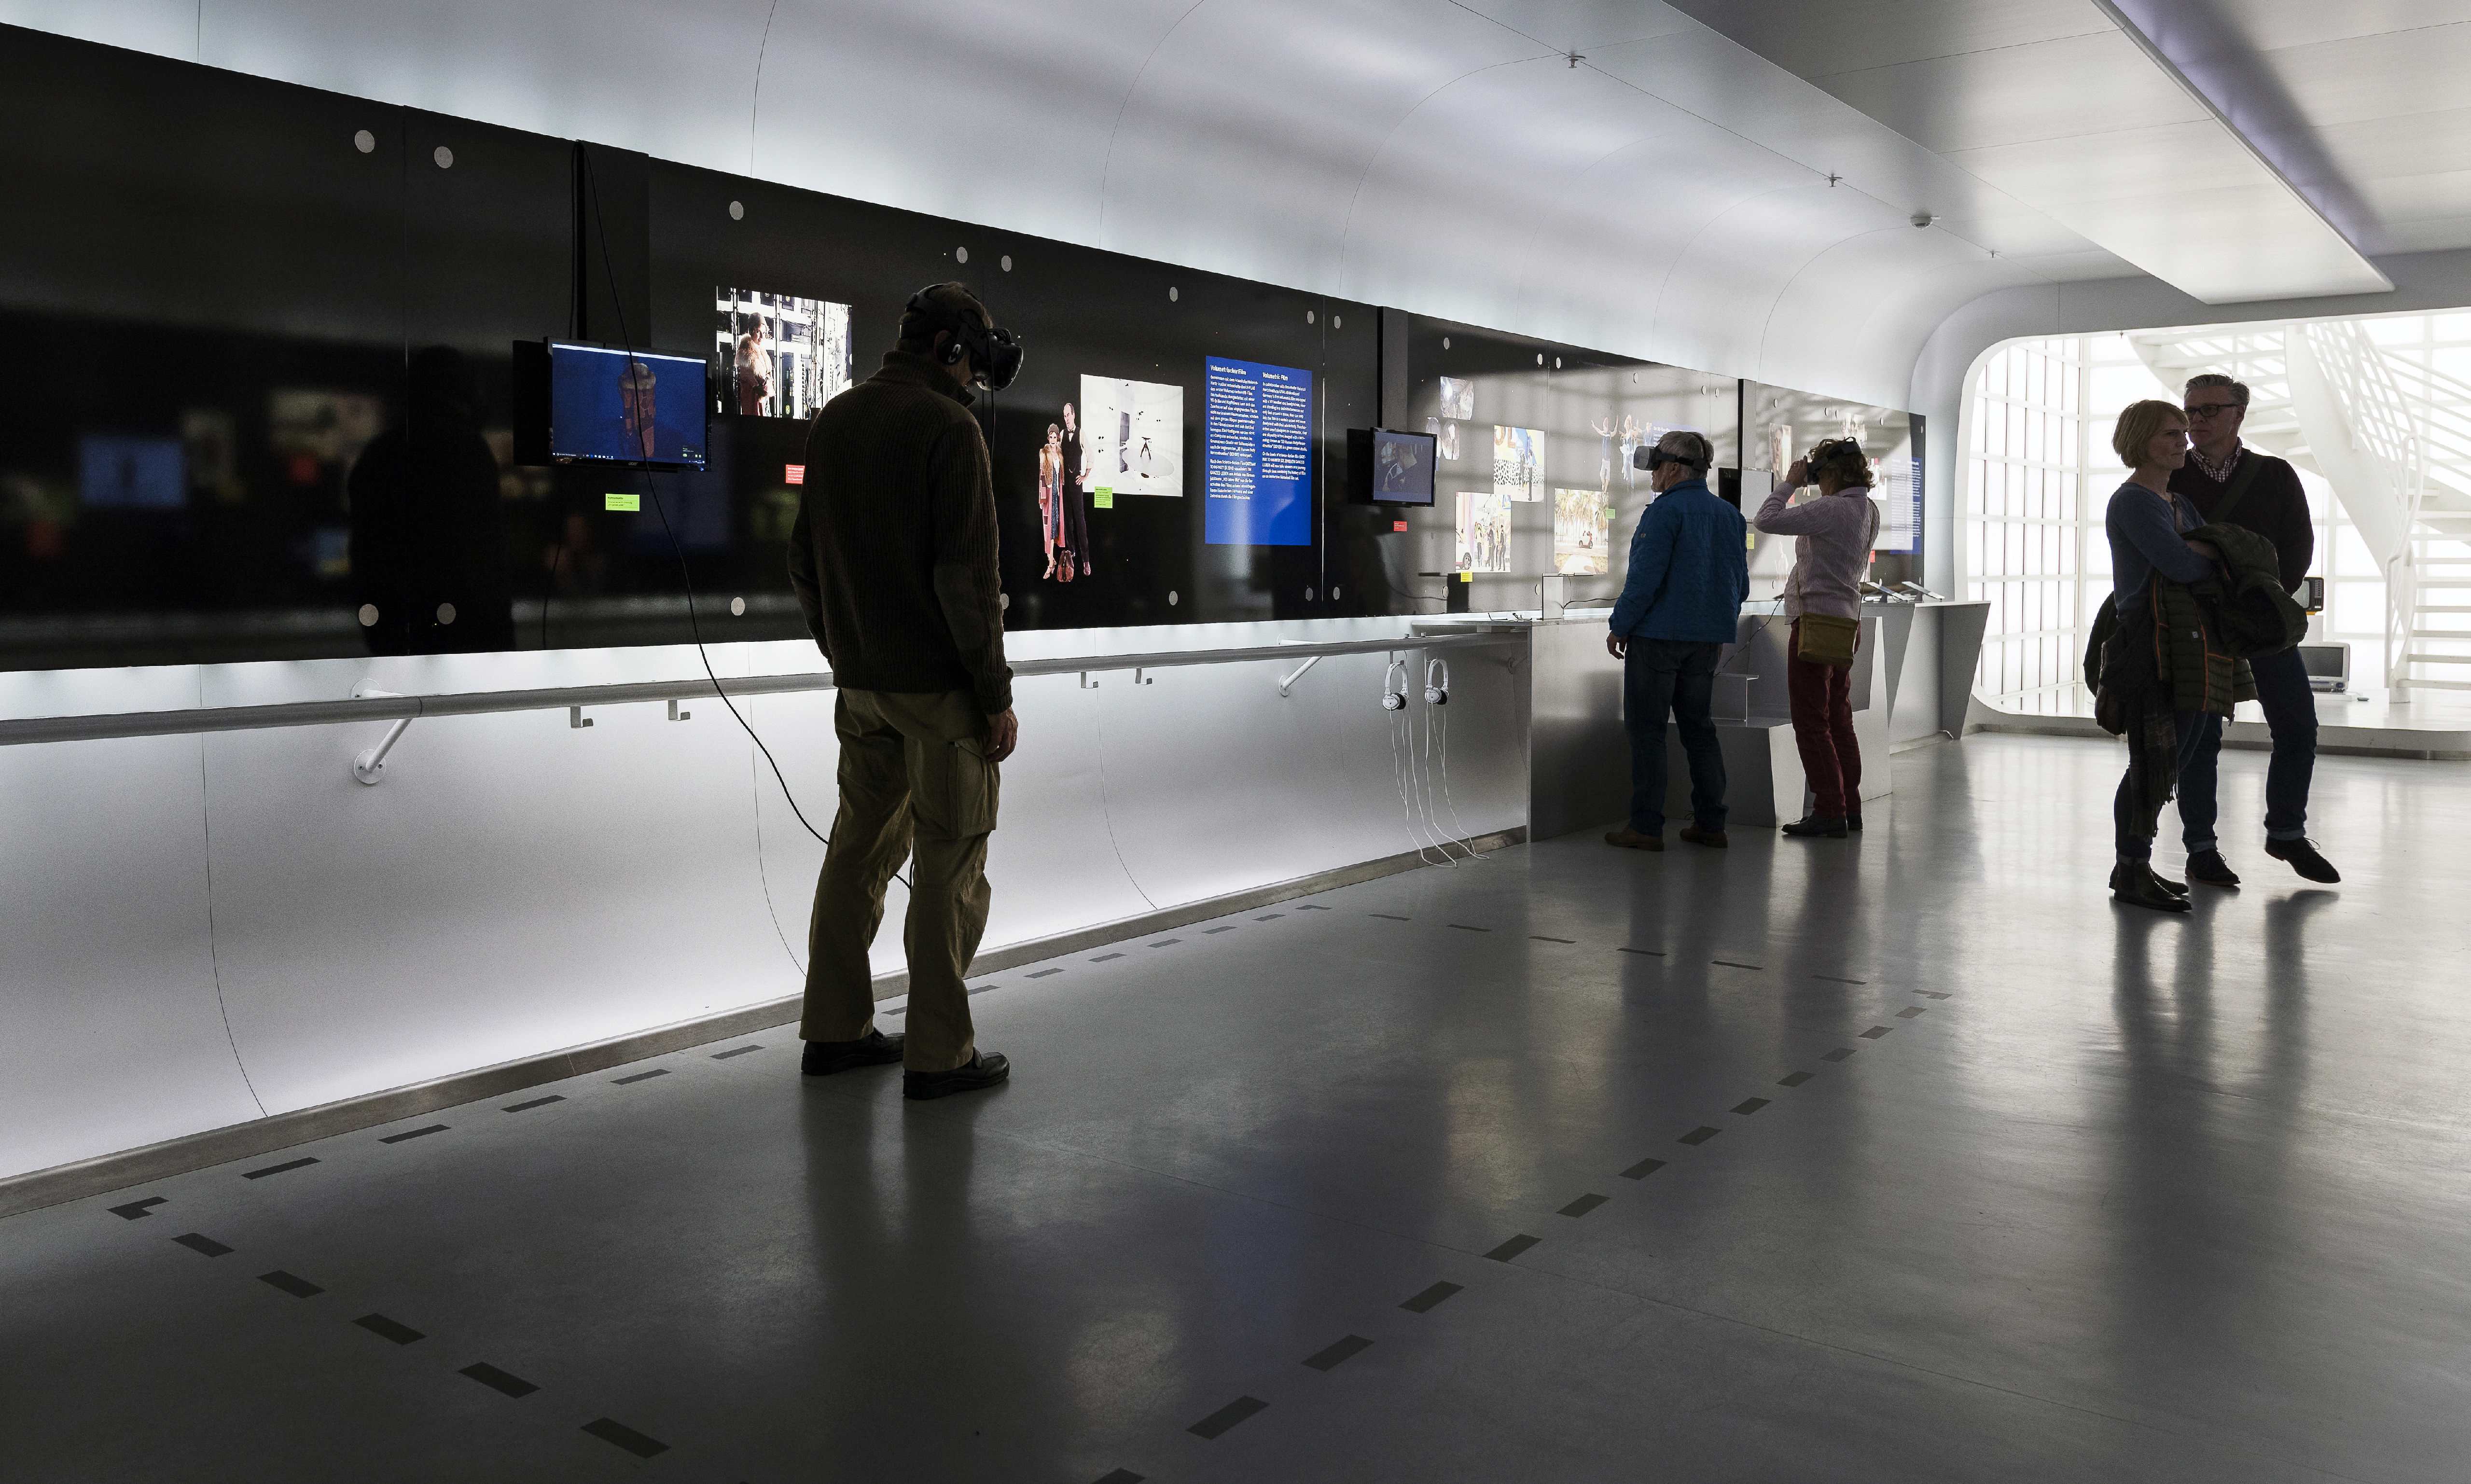 View of the exhibition "Ufa – The History of a Brand", Deutsche Kinemathek, Berlin